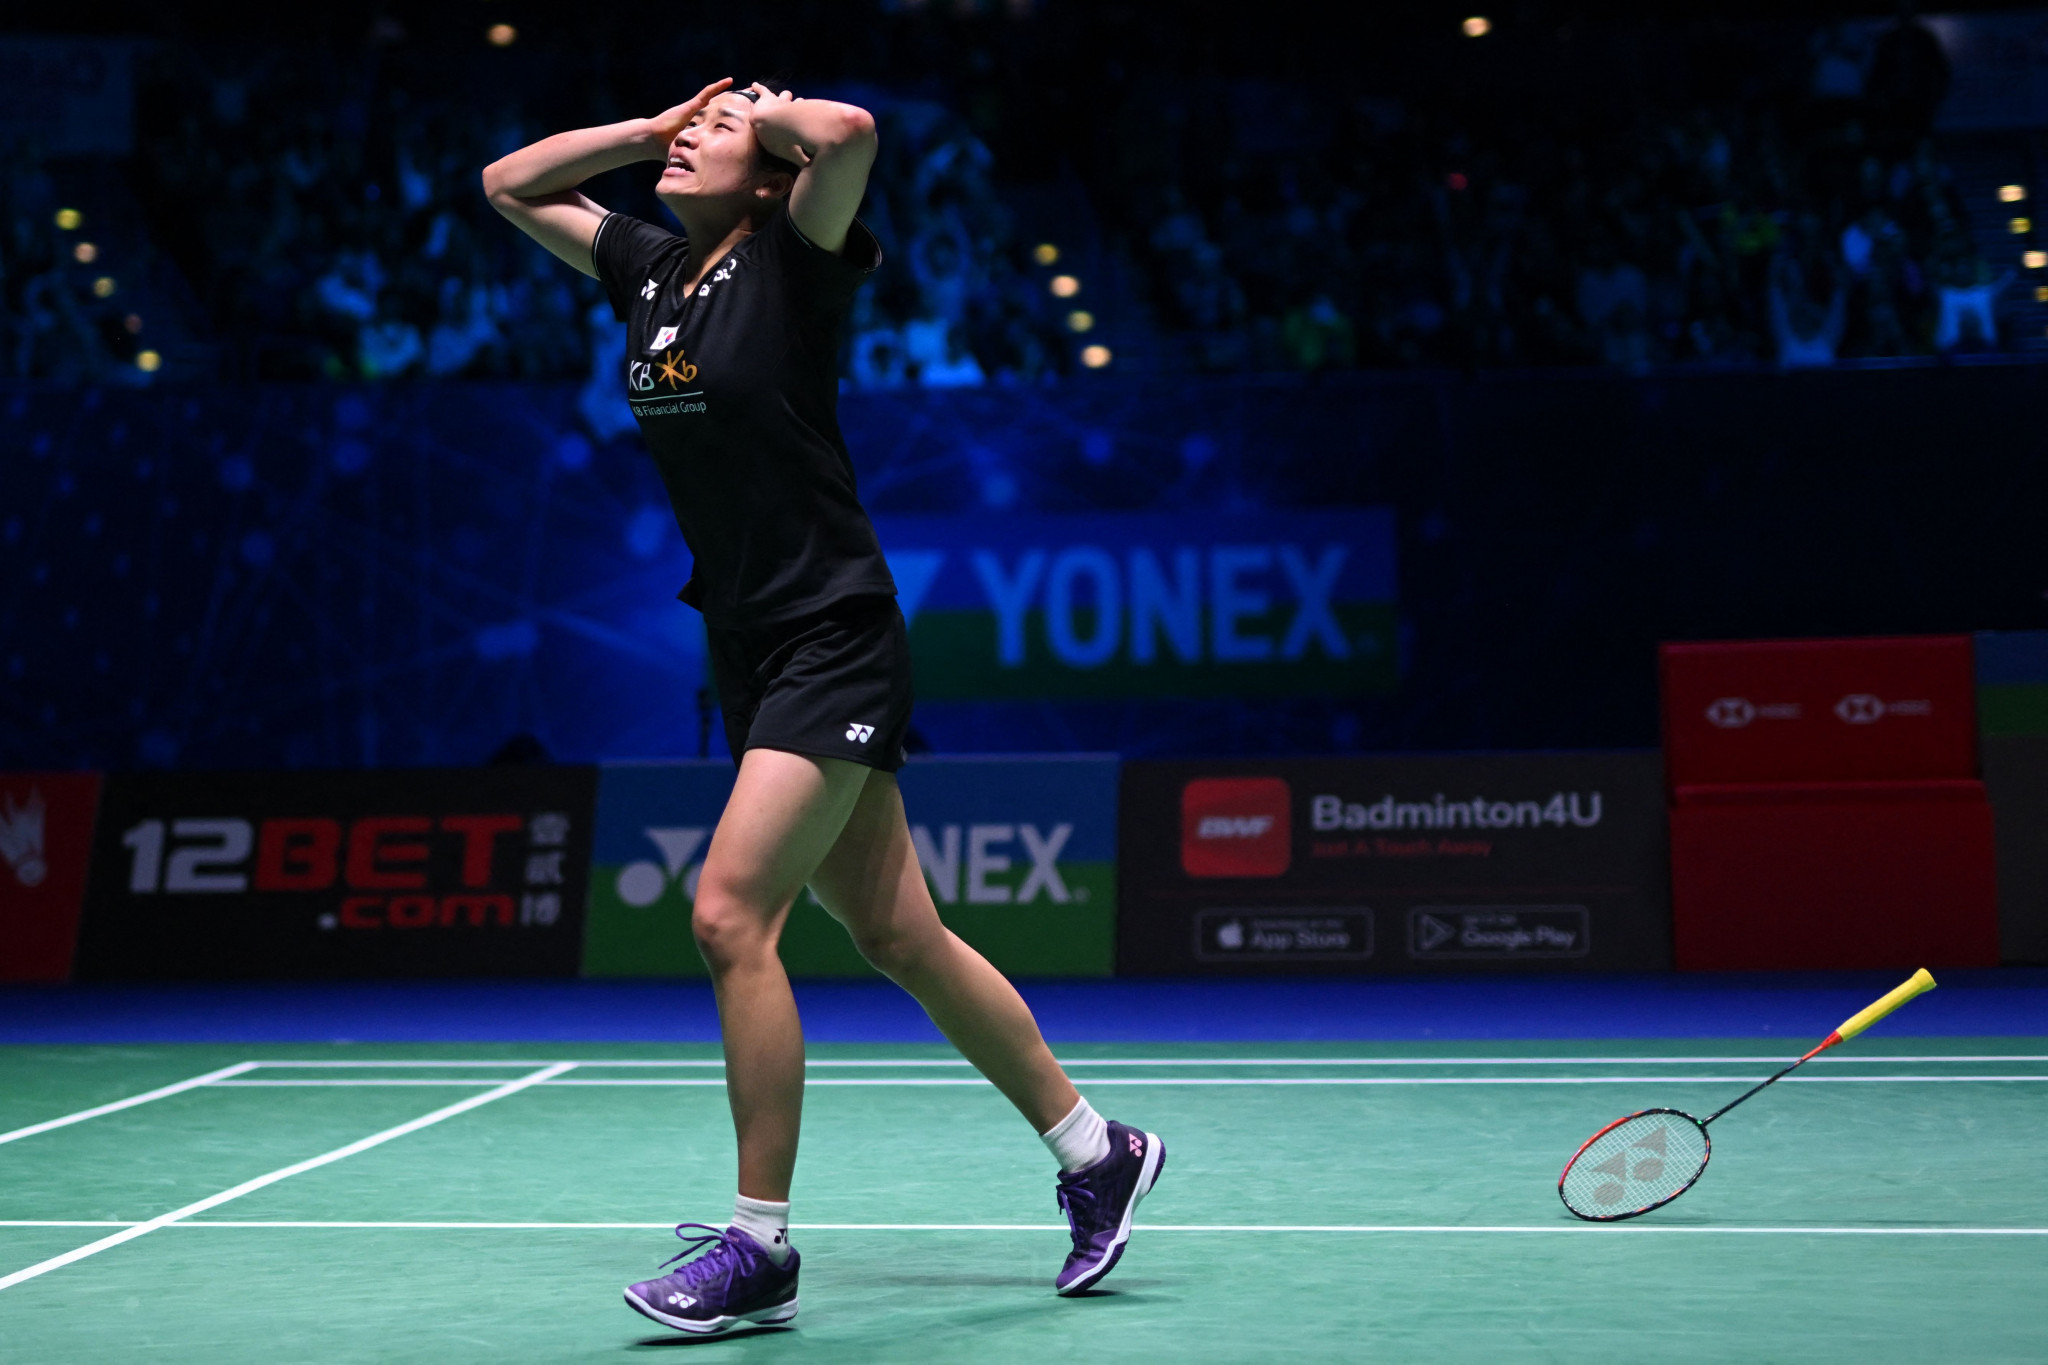 An Se-Young celebrates after winning the women's singles title at the All England Open Badminton Championships ©Getty Images